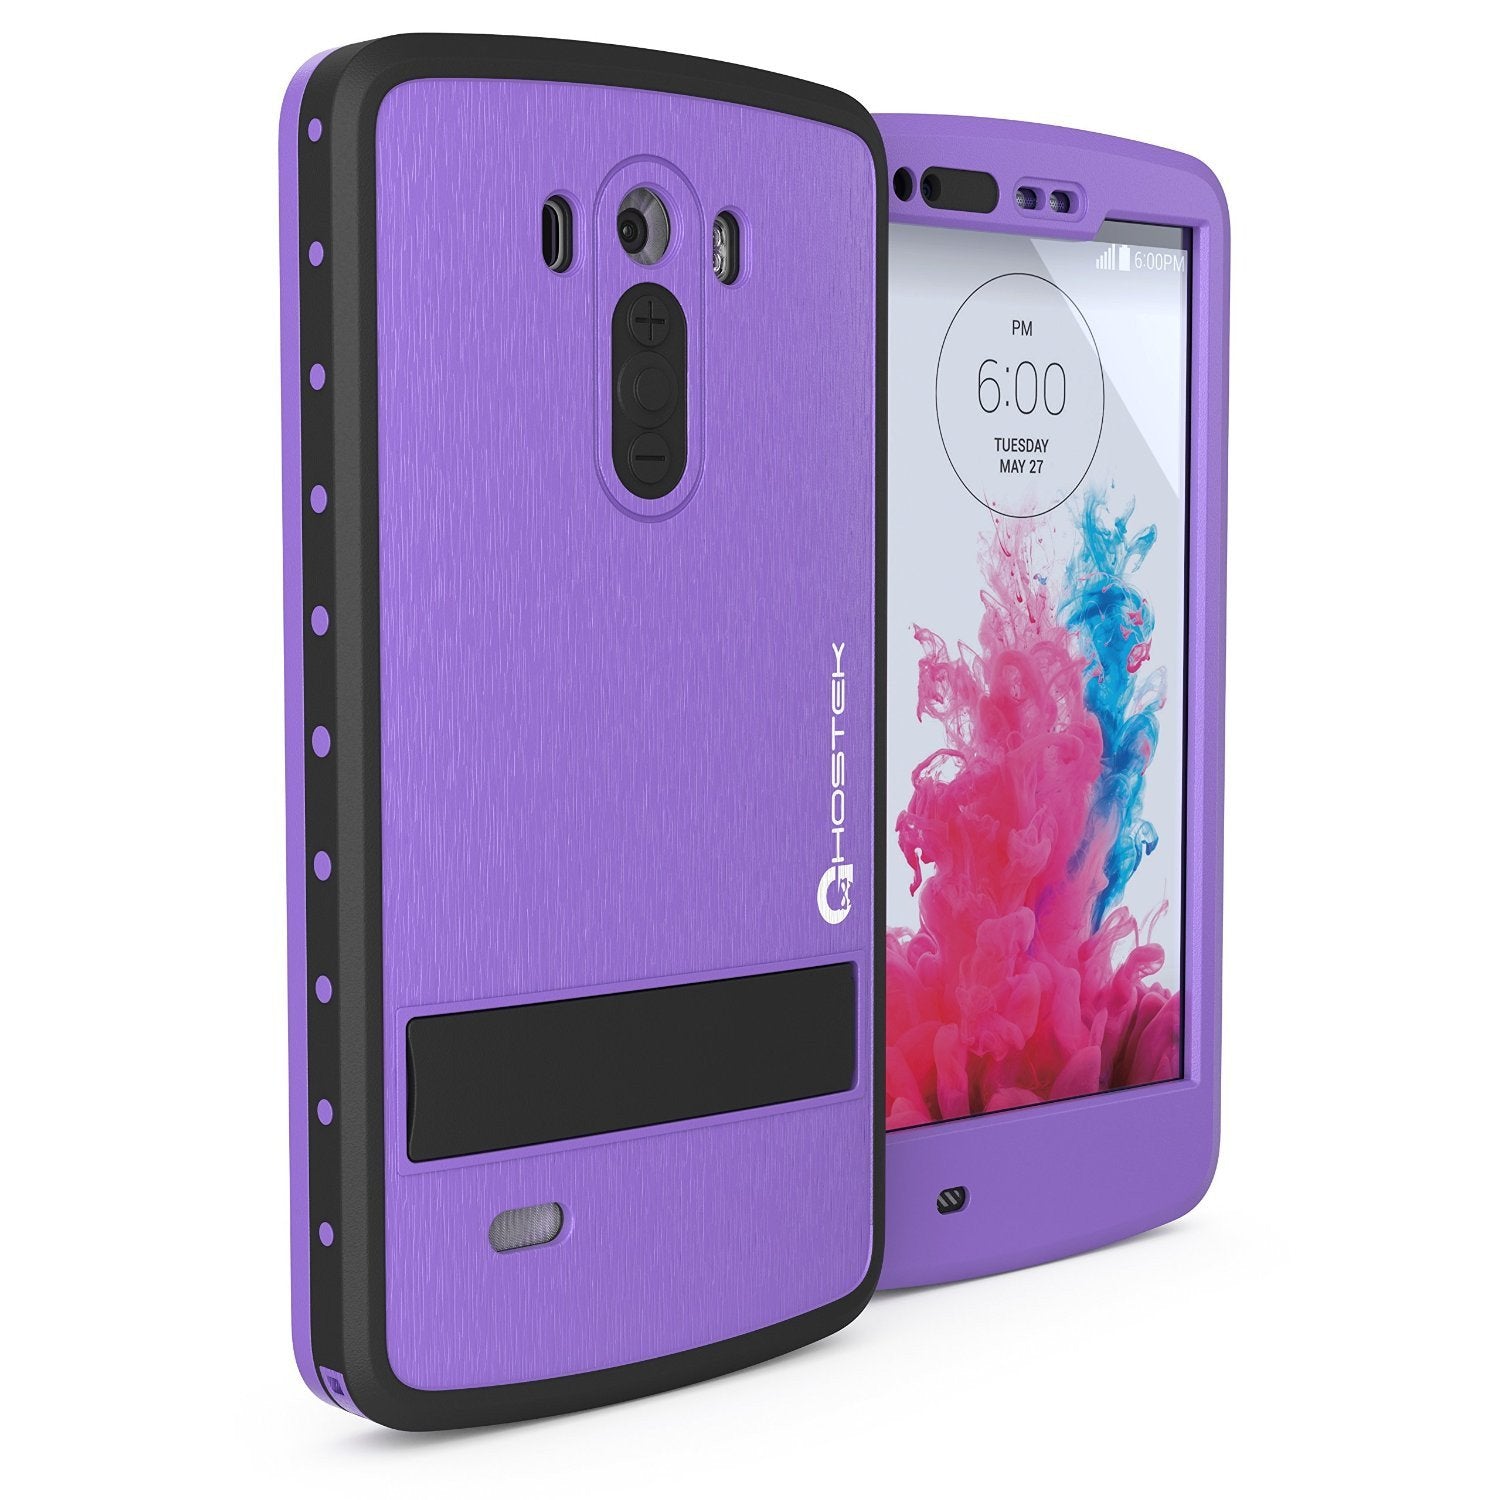 LG G3 Waterproof Case, Ghostek Atomic PURPLE W/ Attached Screen Protector  Slim Fitted  LG G3